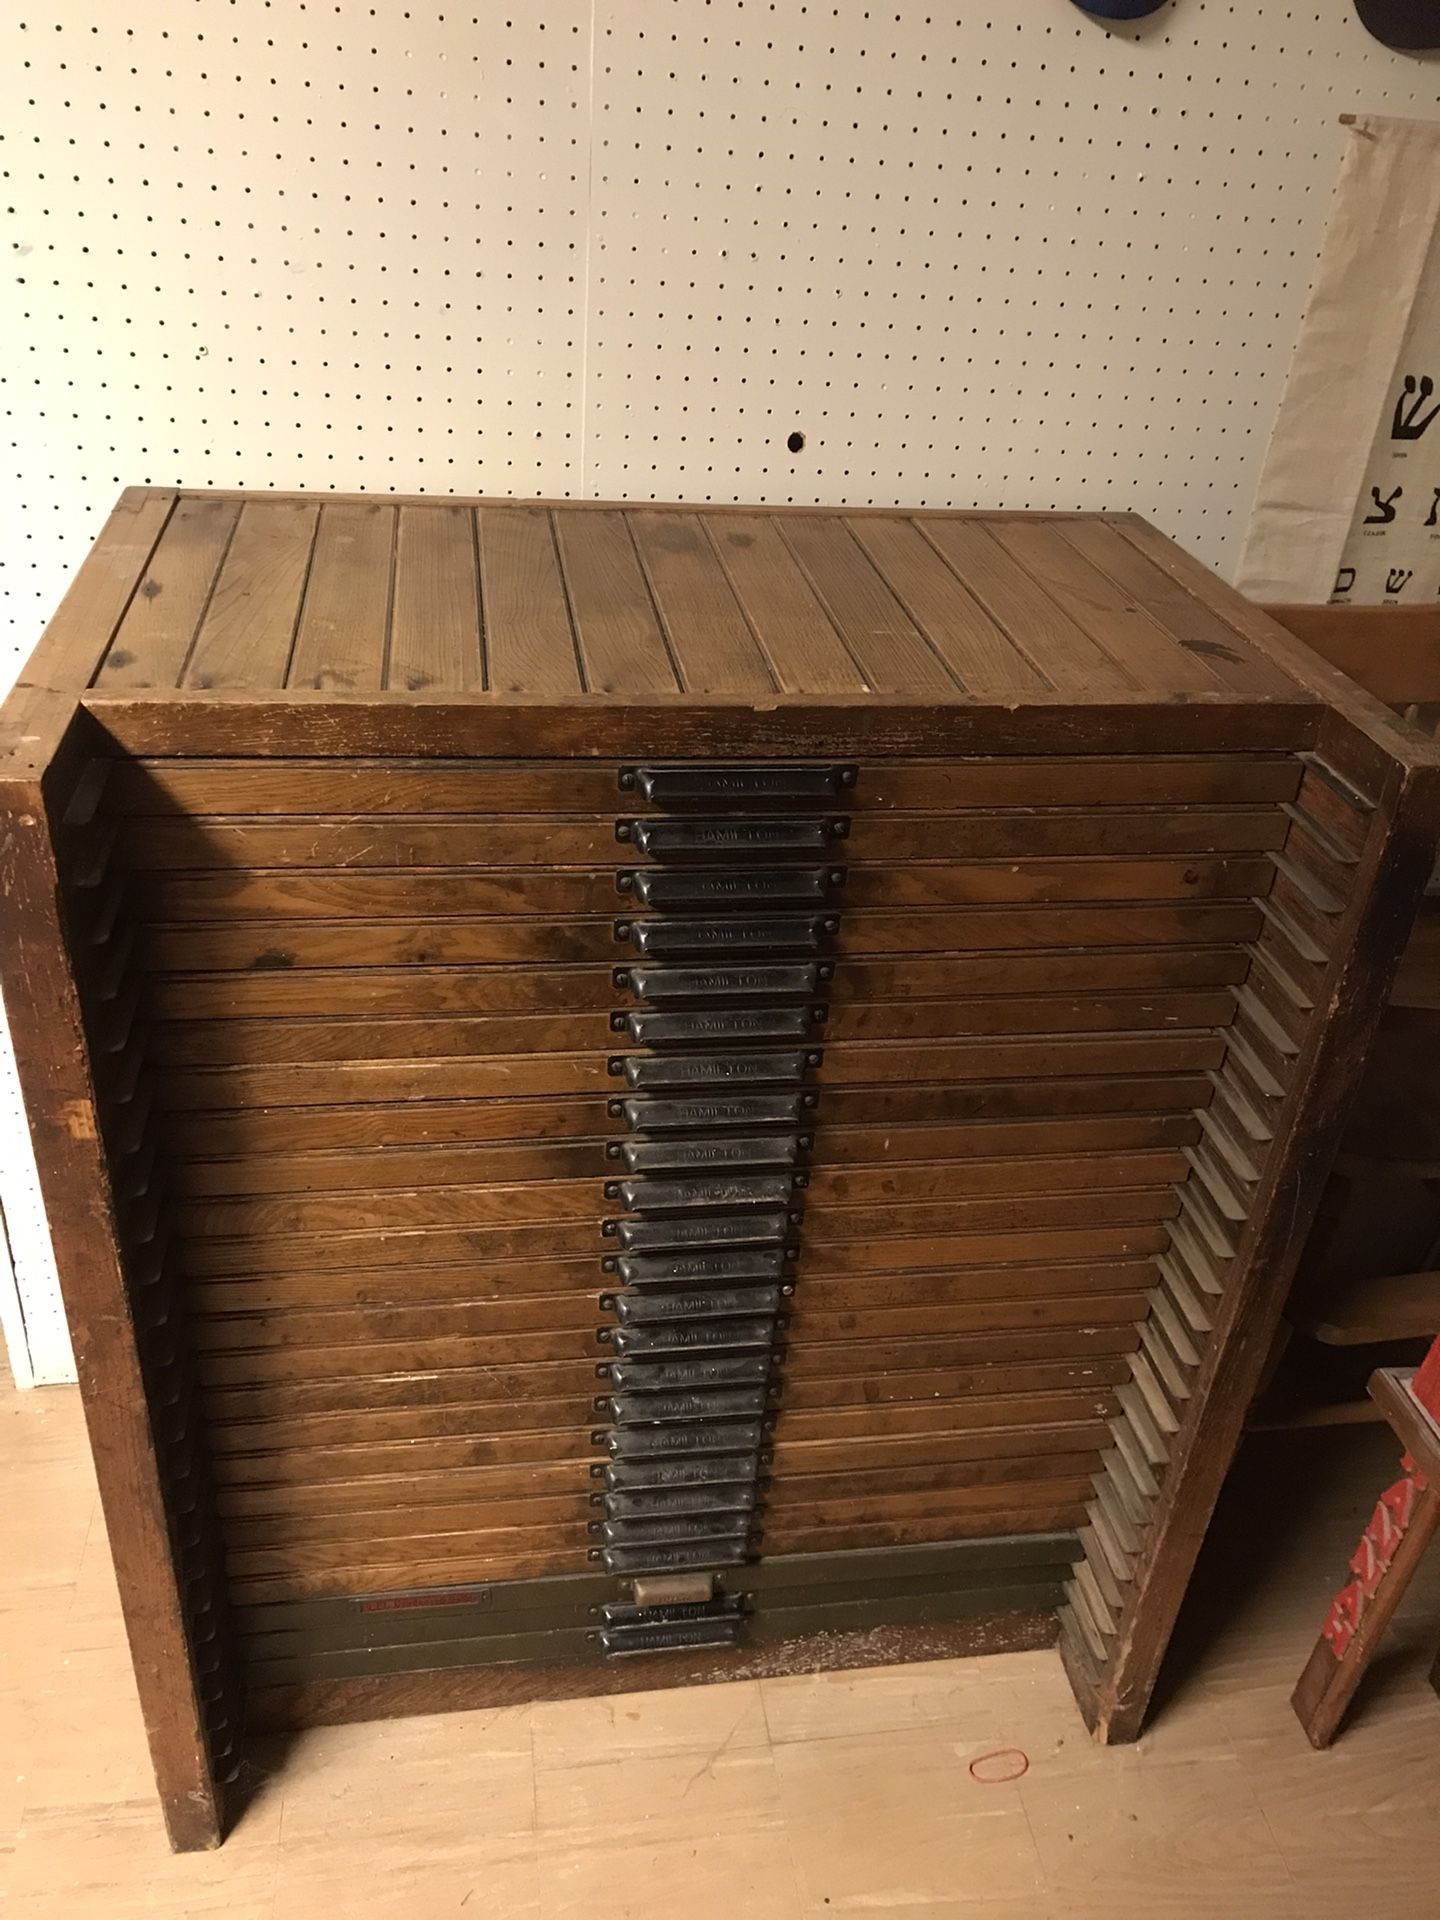 Wood-type Printer Press Cabinet with Wood And Tin-type In Drawers